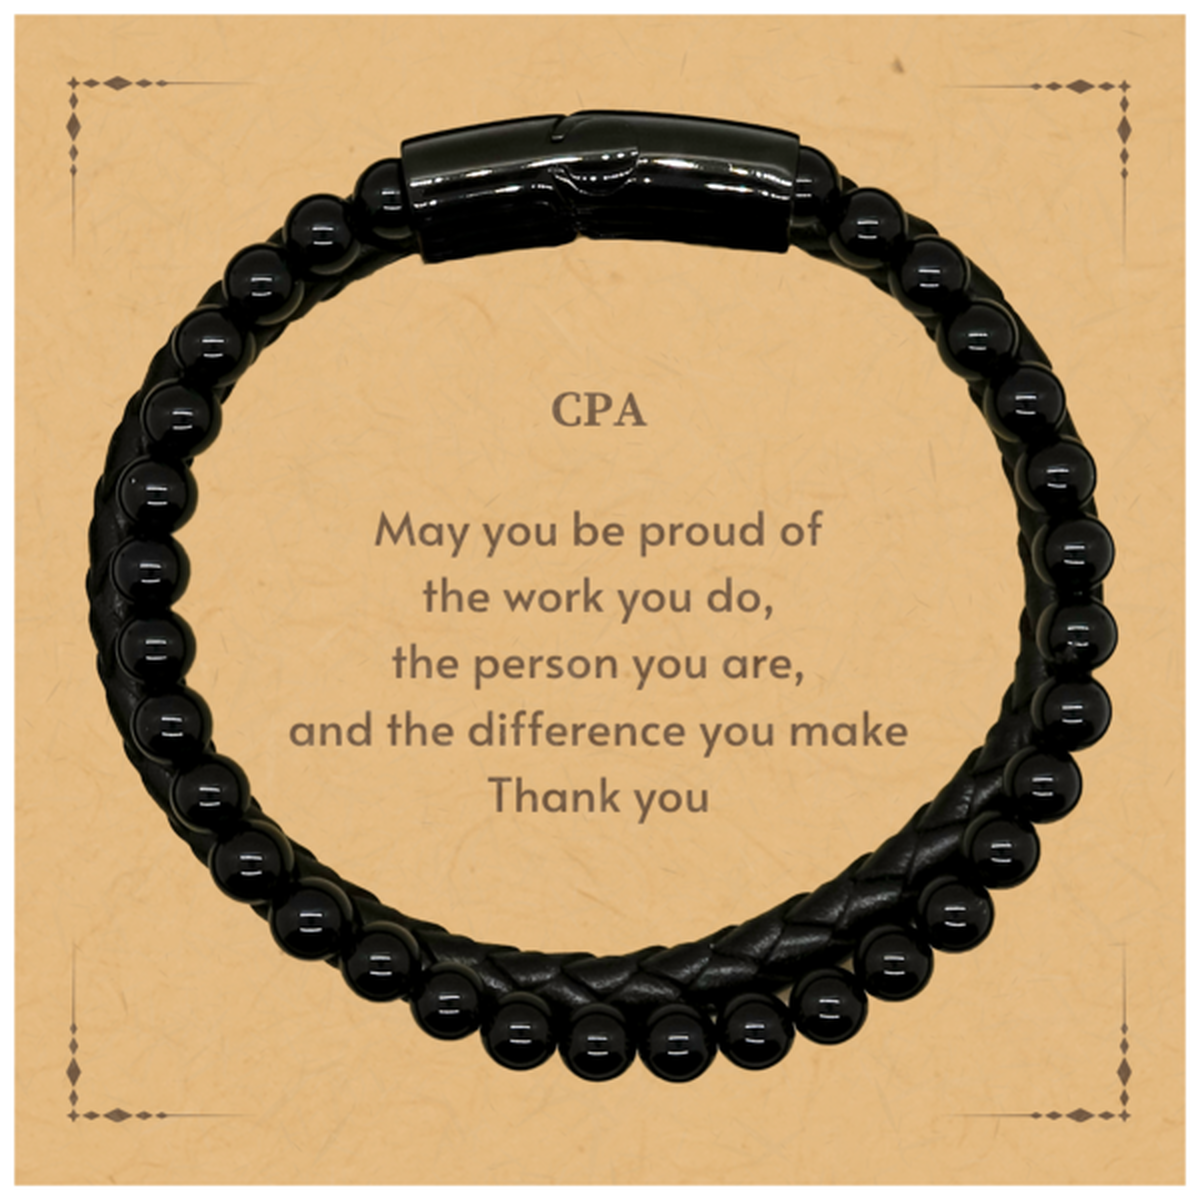 Heartwarming Stone Leather Bracelets Retirement Coworkers Gifts for CPA, CPA May You be proud of the work you do, the person you are Gifts for Boss Men Women Friends